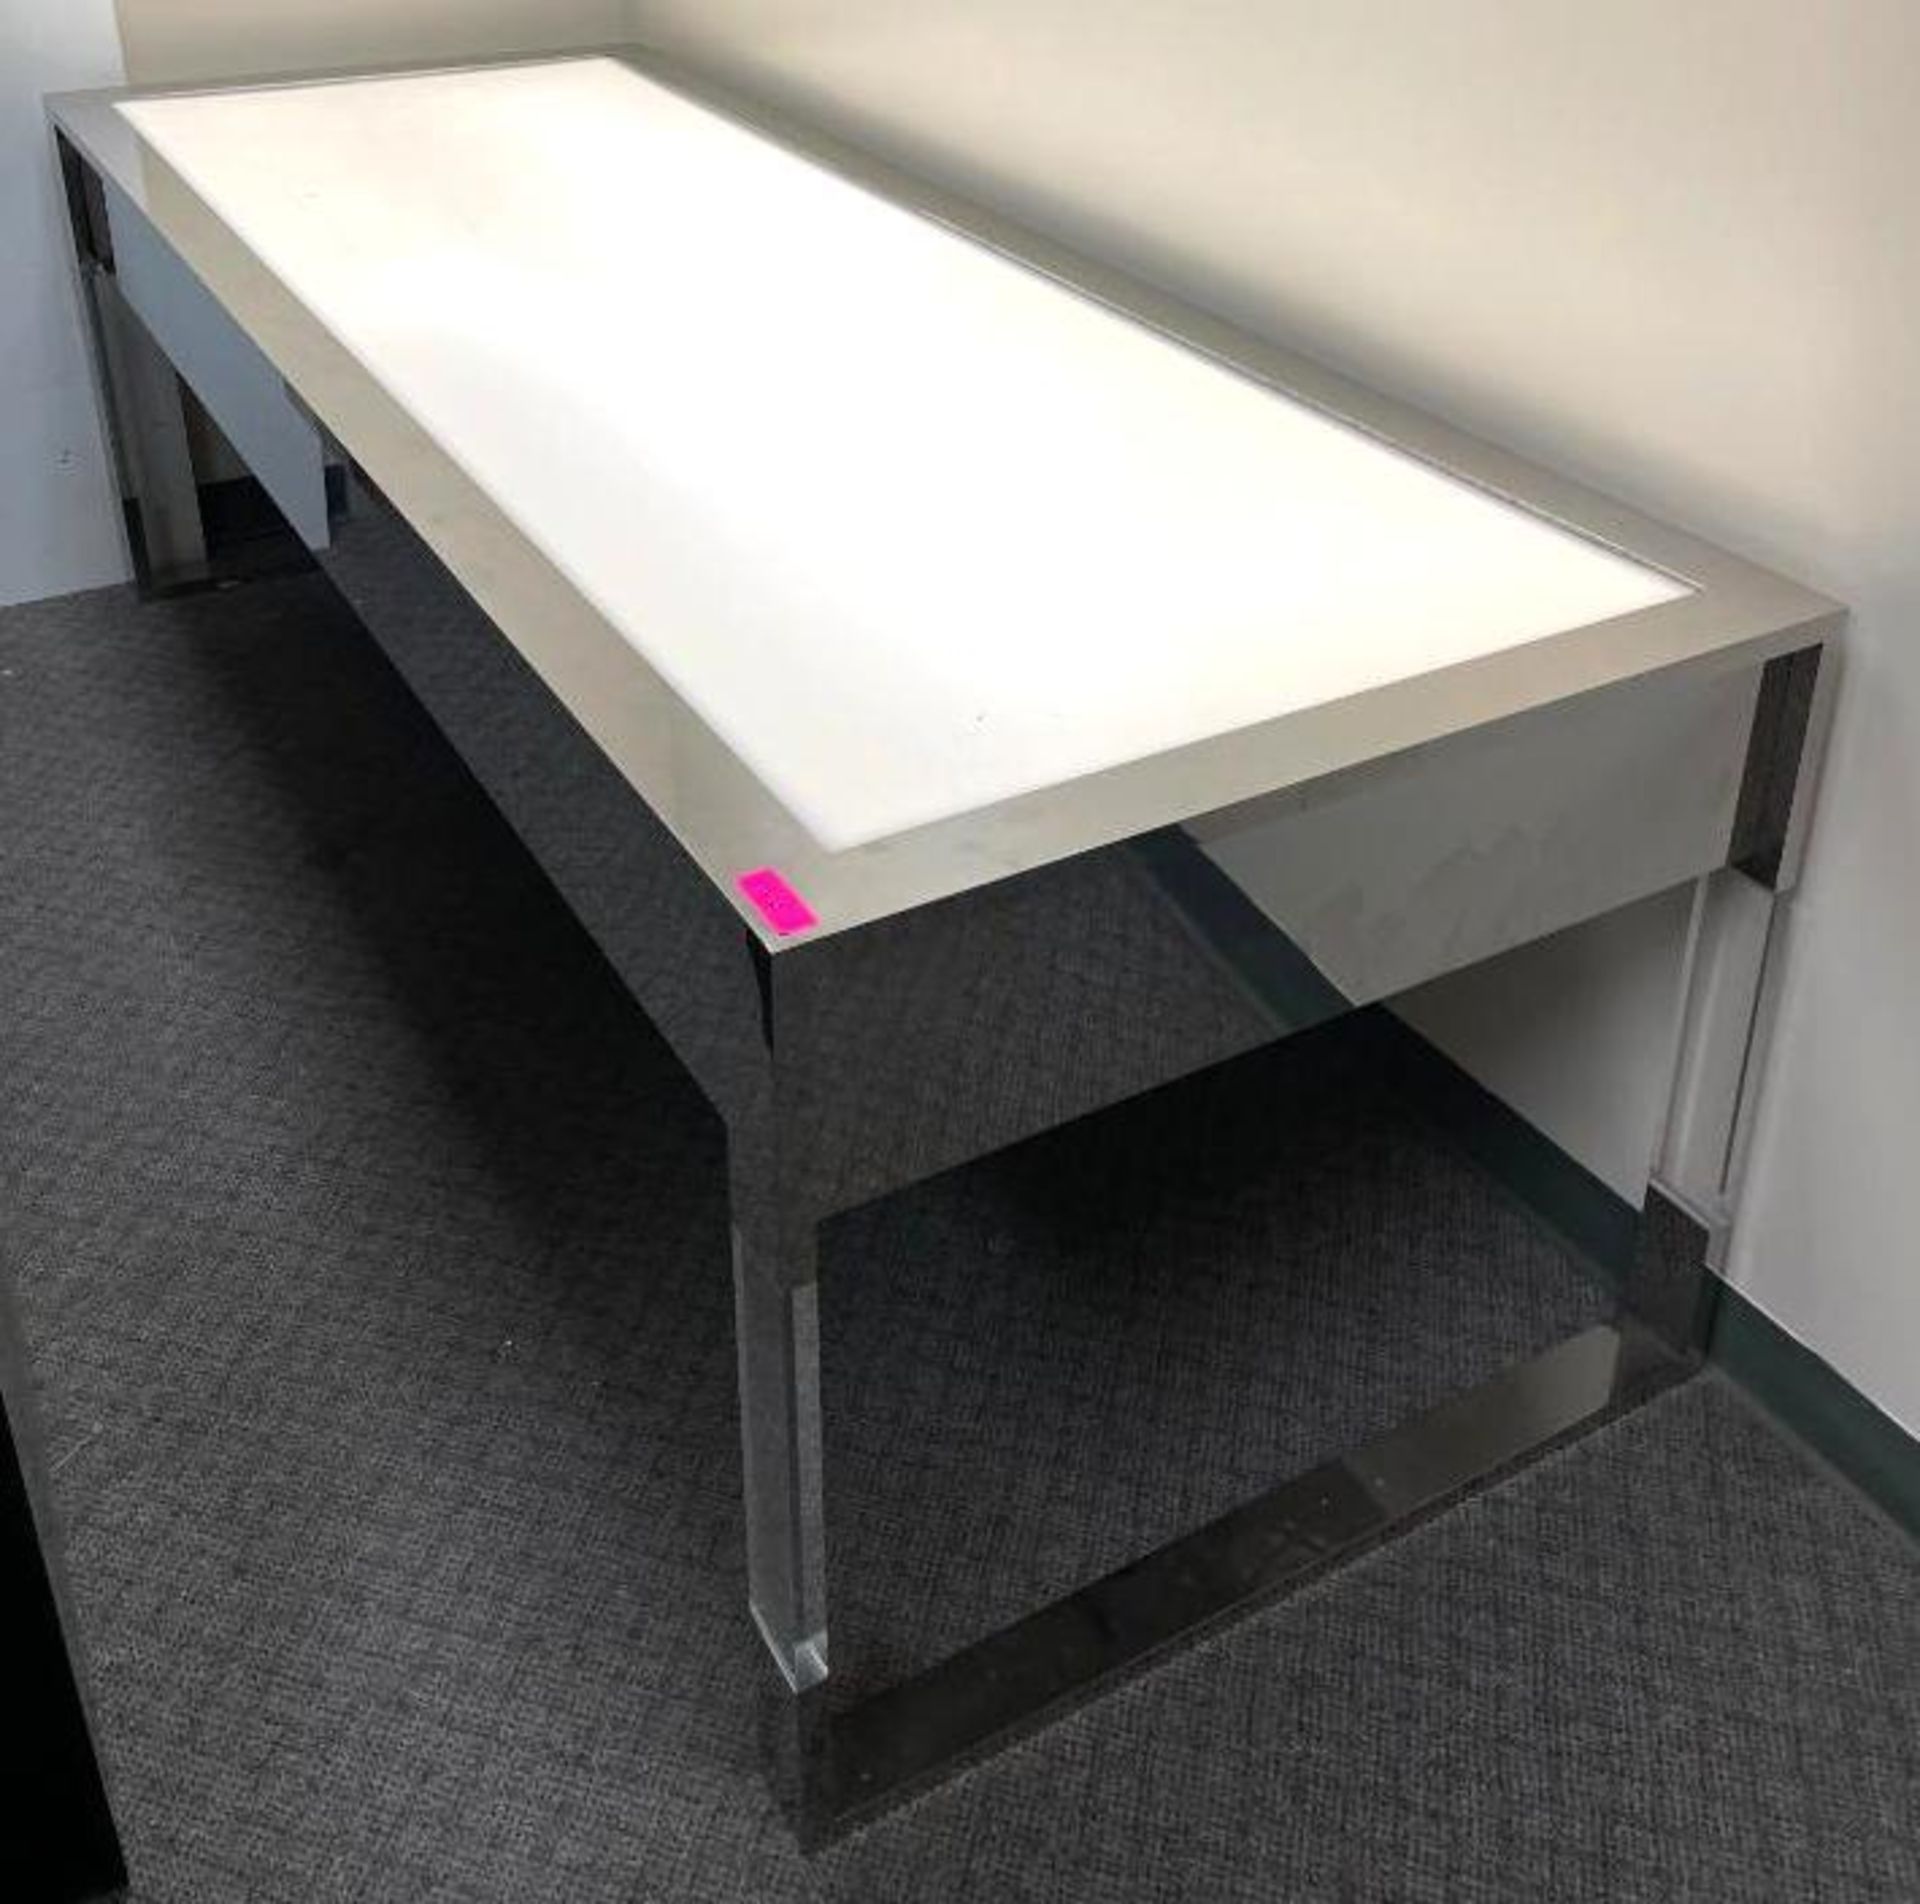 8' LIGHTED PLOTTER TABLE WITH GLASS TOP SIZE: 96"X36"X32" LOCATION: OFFICE QTY: 1